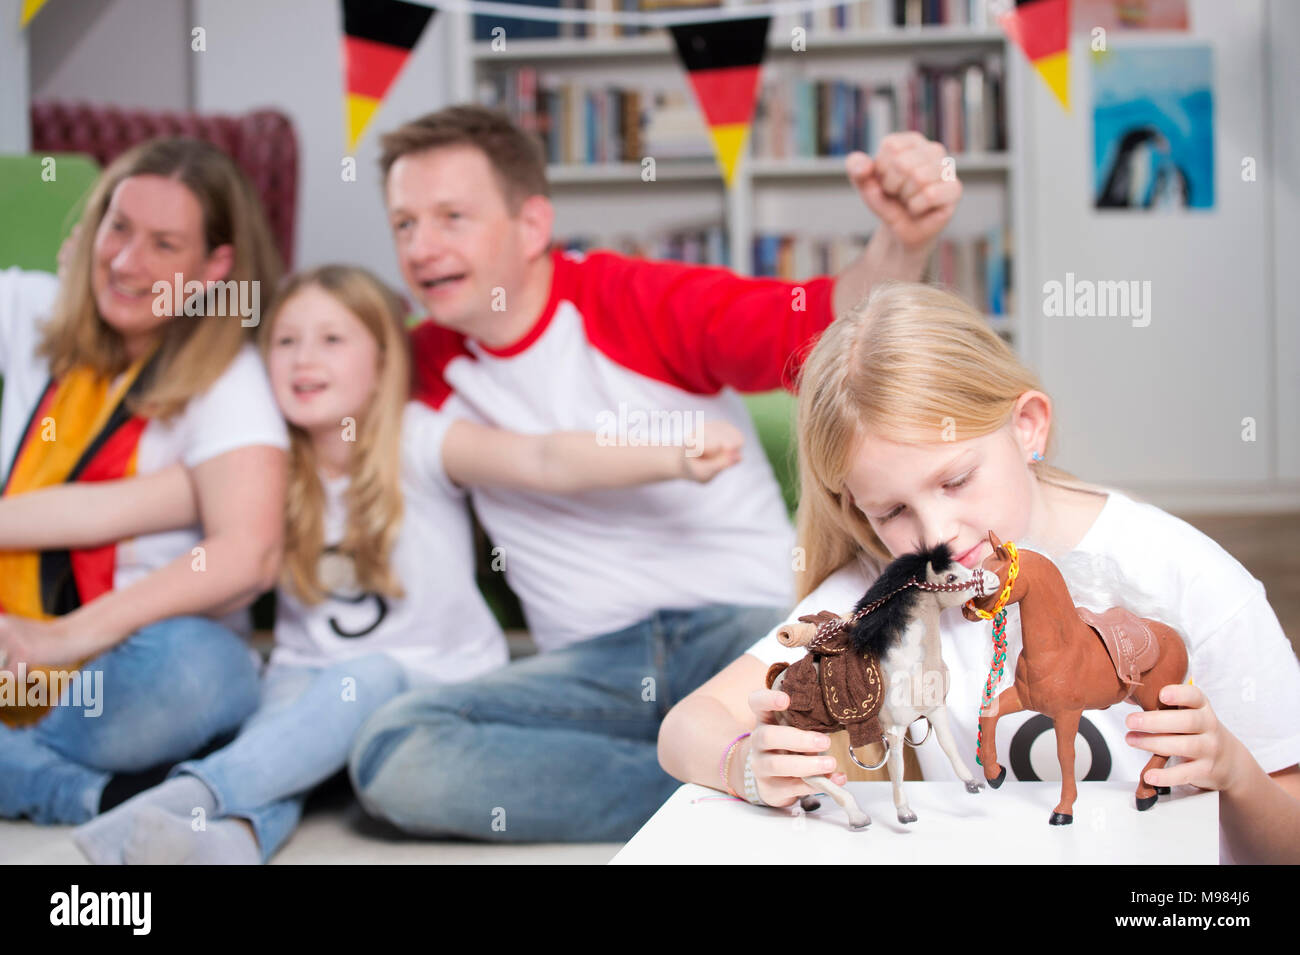 Family watching football world cup on TV, while little girl is playing with toys Stock Photo